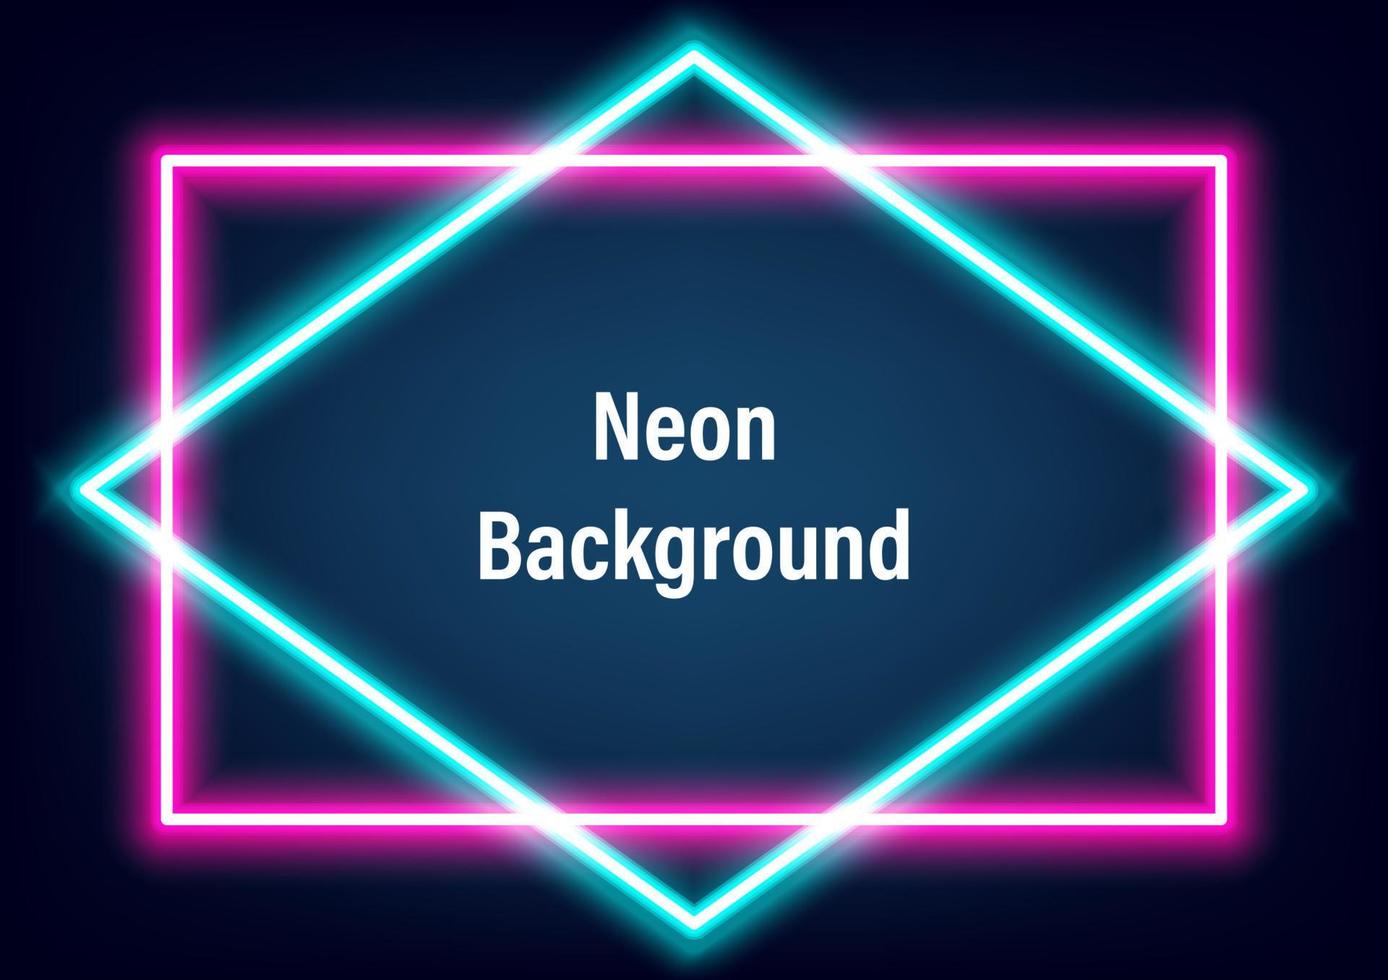 Vector illustration background with neon blue and pink squares typography frame for banner,product advertisement,marketing.